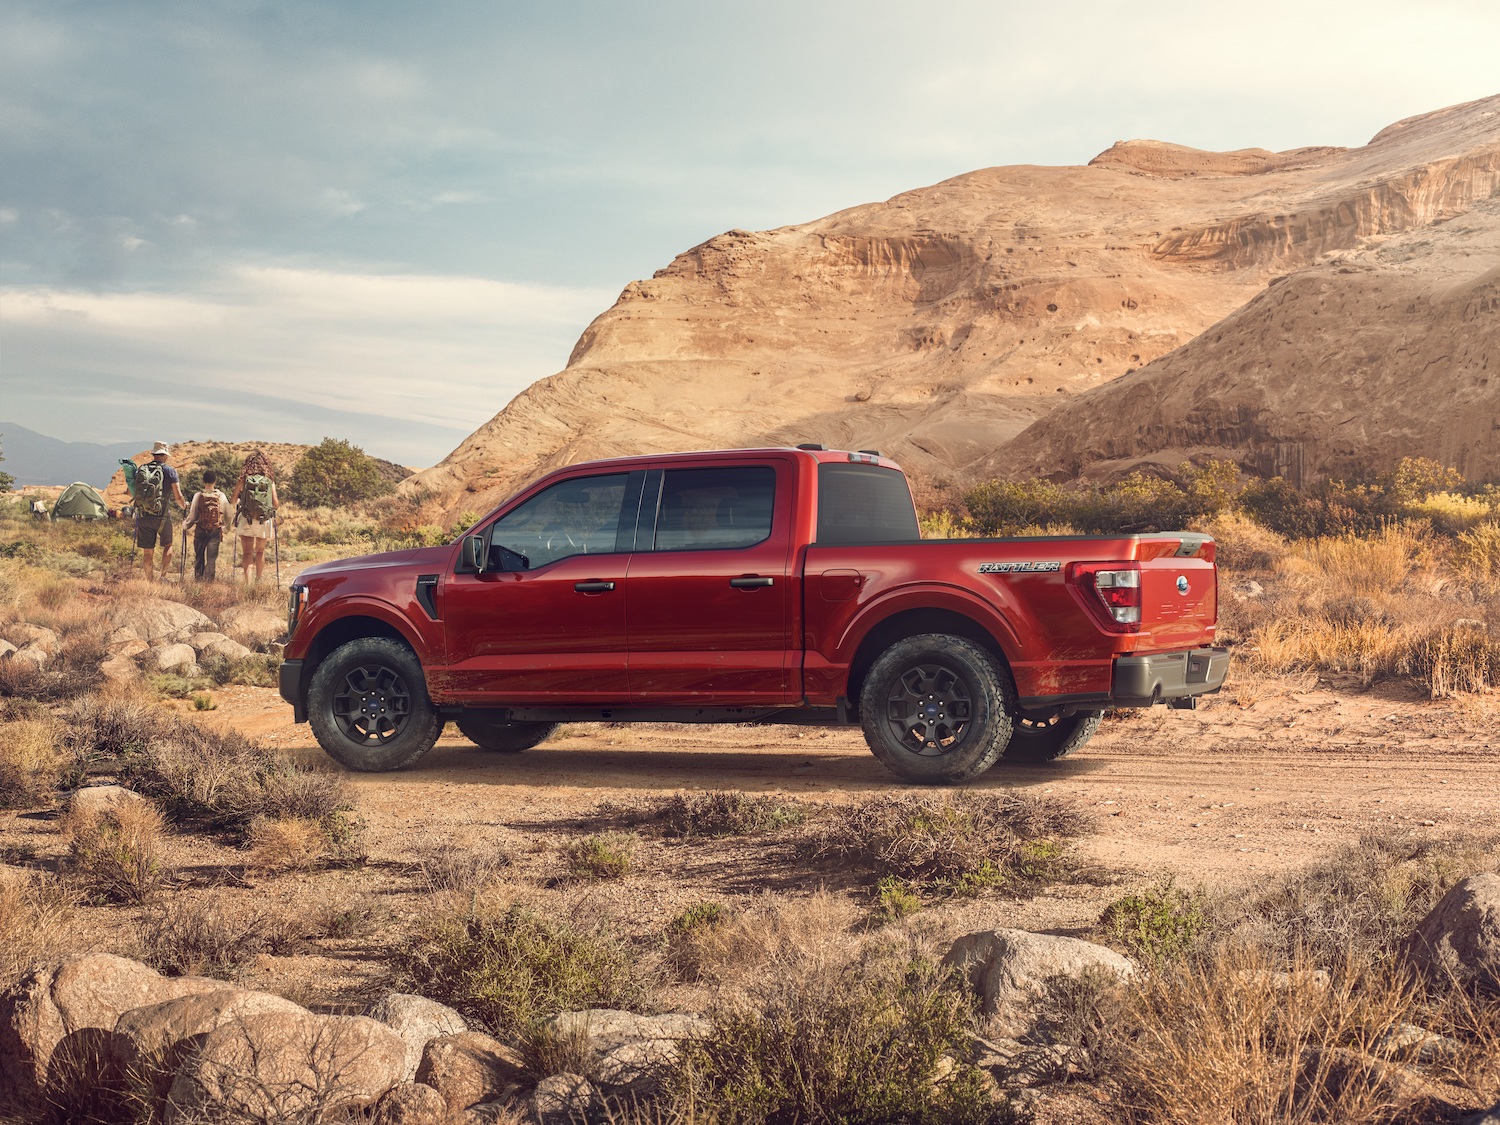 An entry-level red Ford F-150 XL parked in the desert for a publicity photo, with hikers visible in the background.